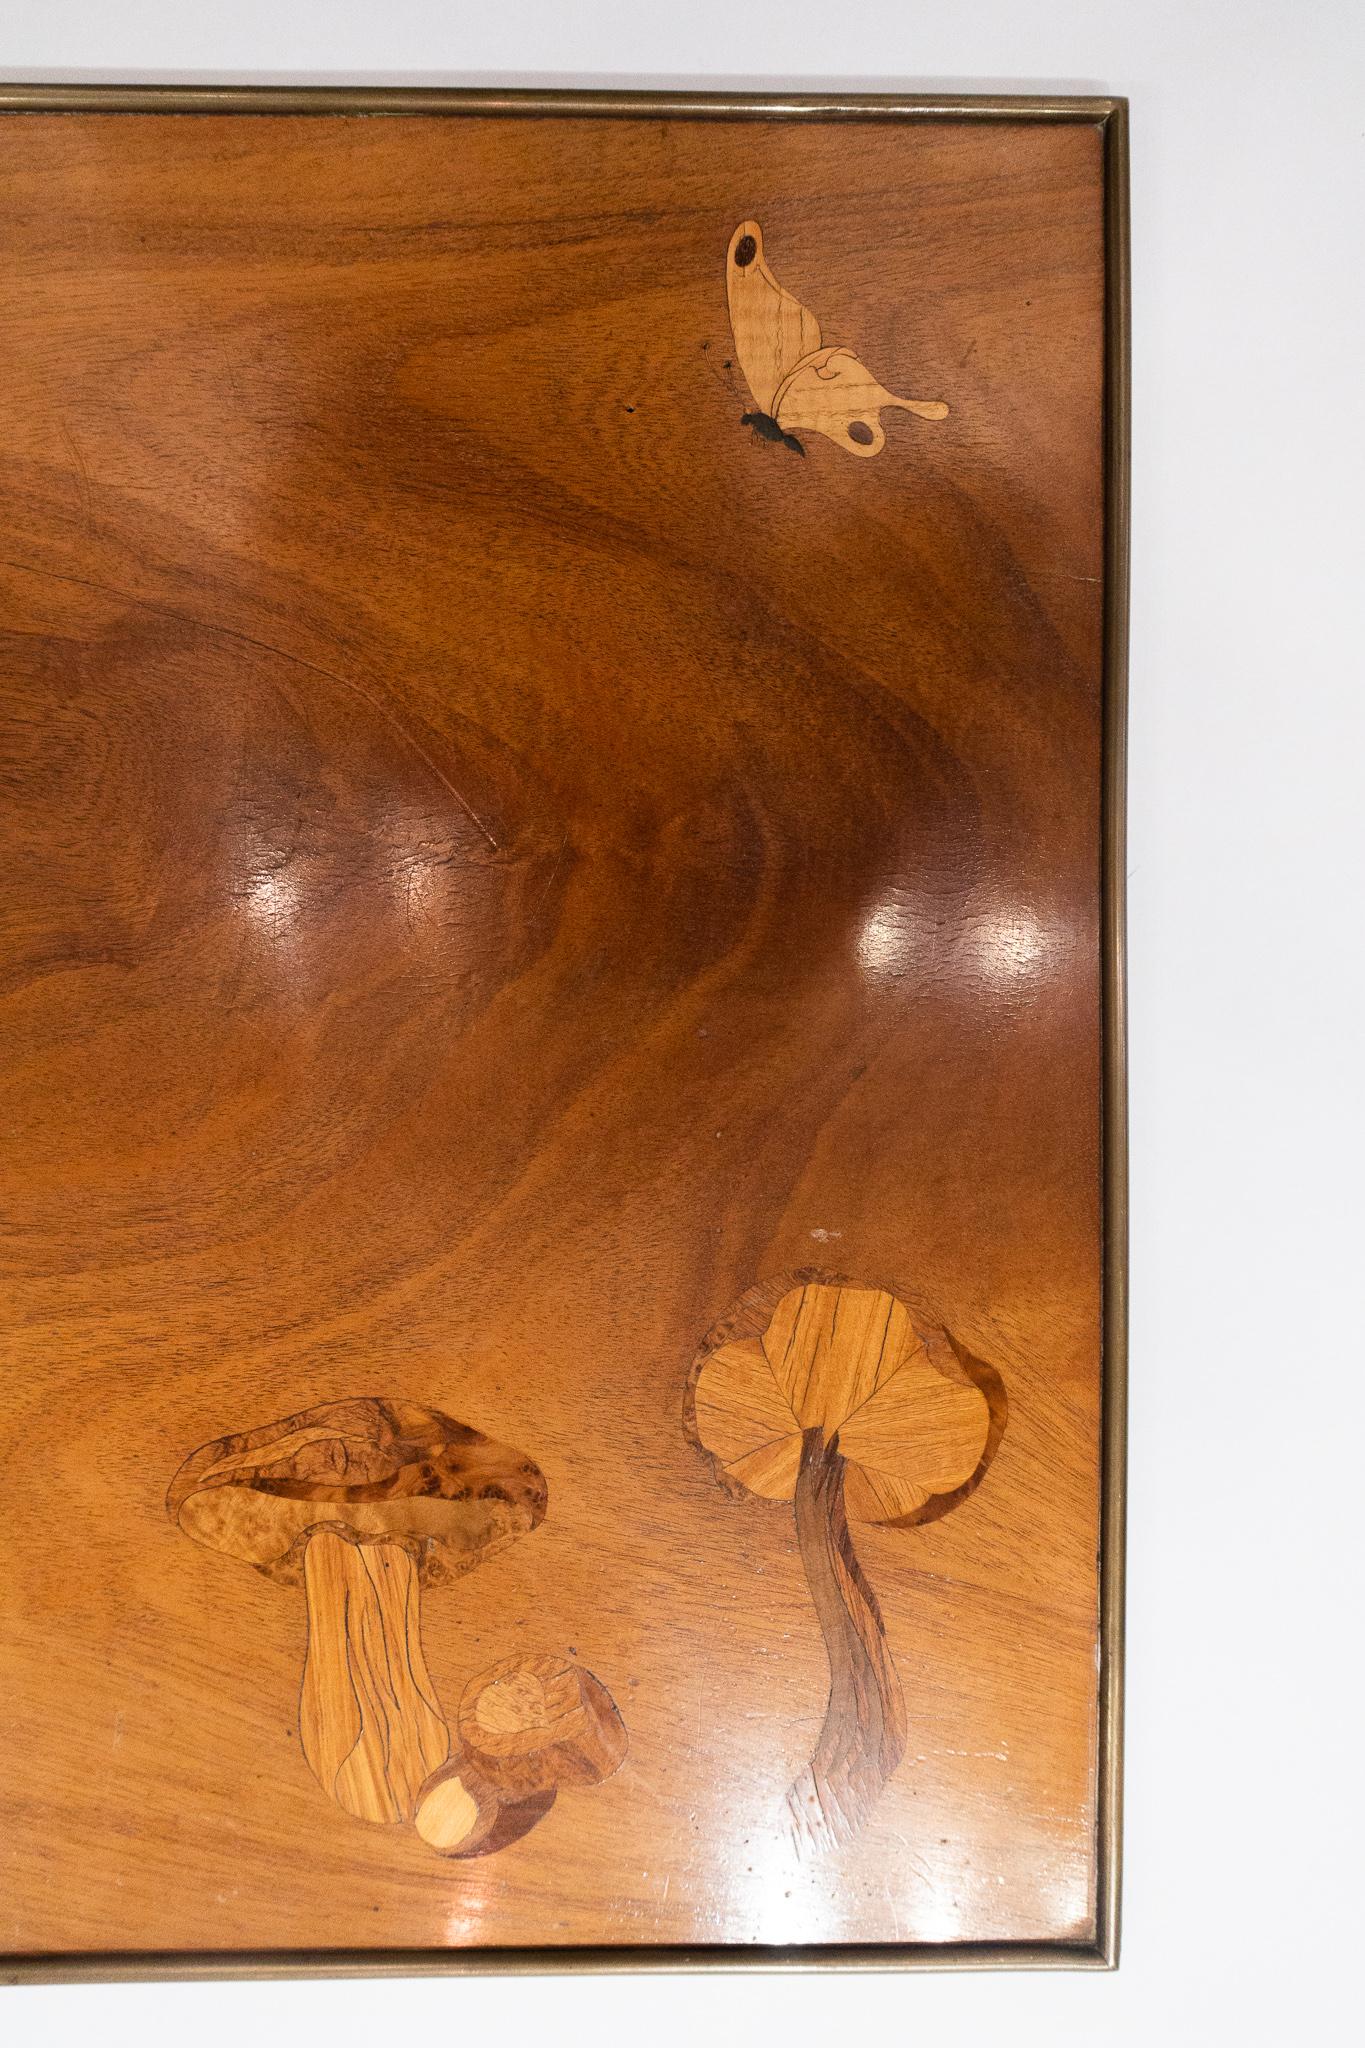 Beautifully executed inlaid wooden panel or table top with mushrooms and a butterfly. This piece was originally sold in the Christian Dior 